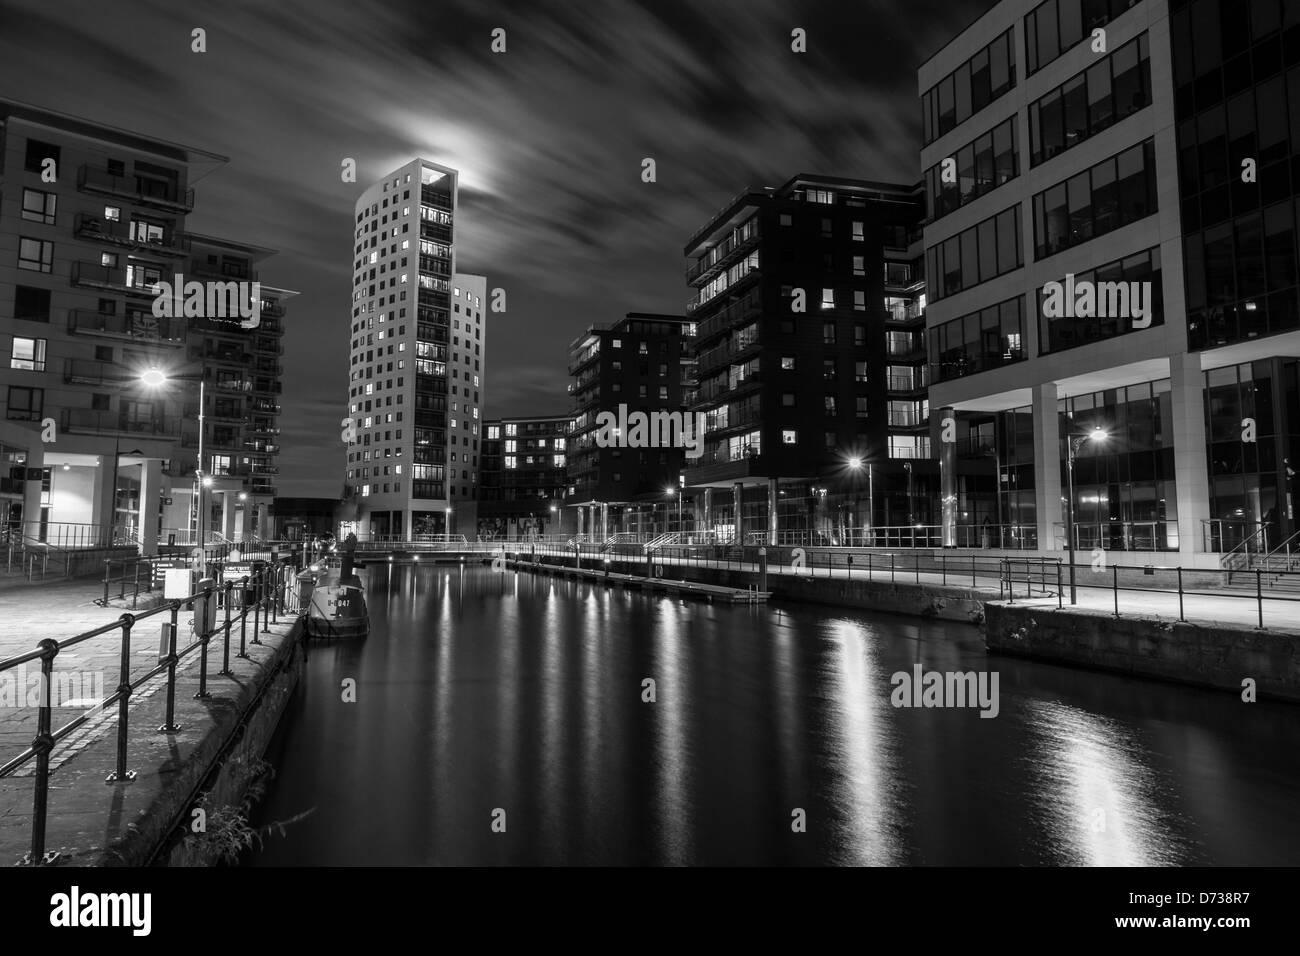 Clarence dock night Black and White Stock Photos & Images - Alamy